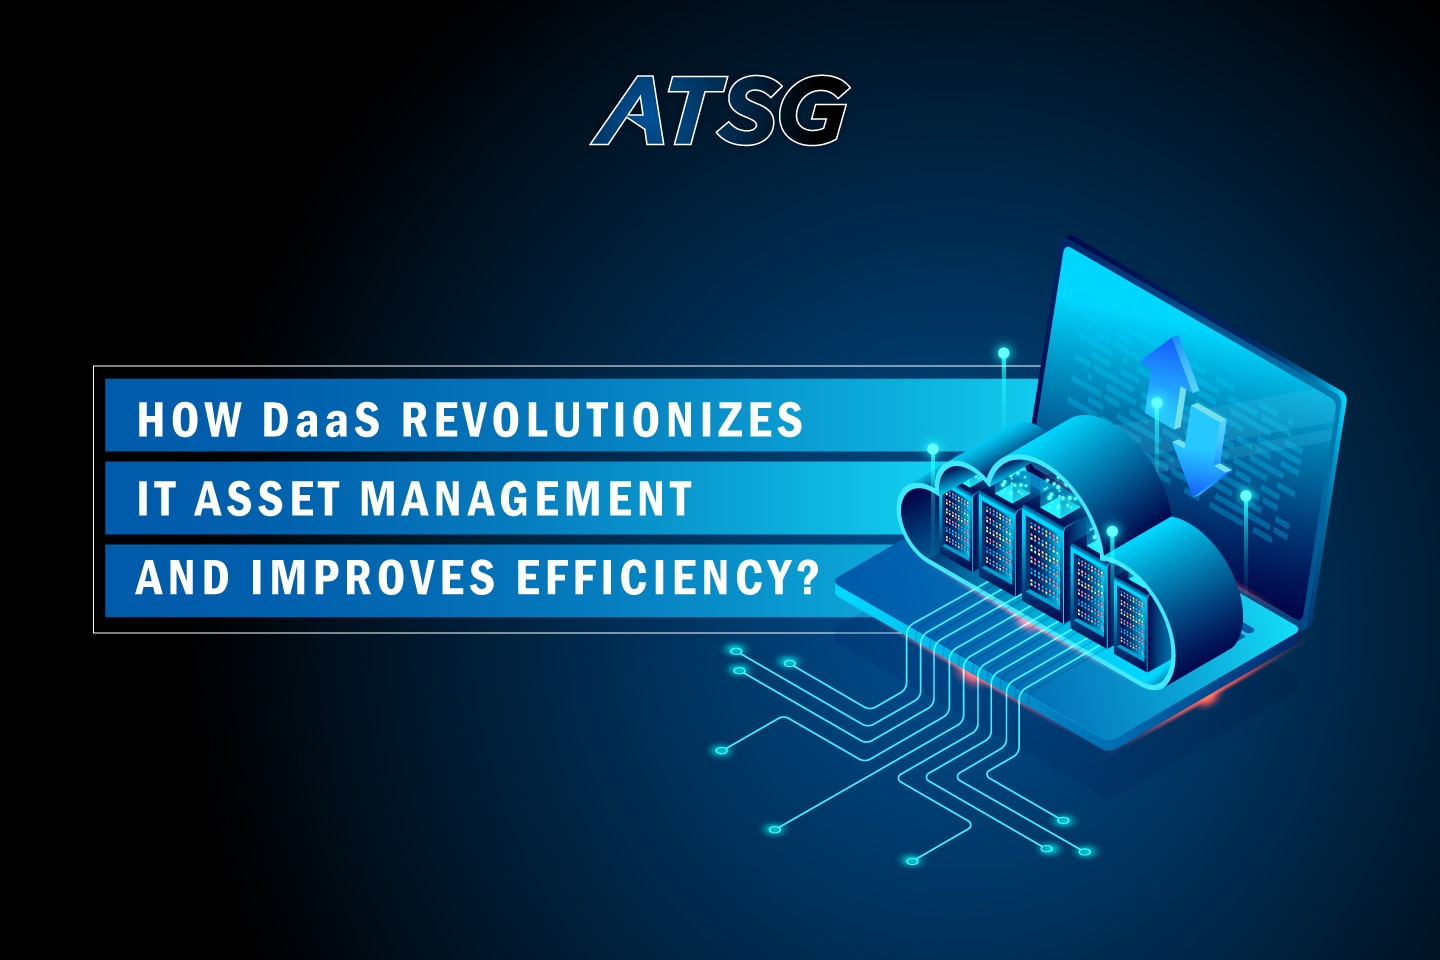 How-DaaS-Revolutionizes-IT-Asset-Management-and-Improves-Efficiency-Featured